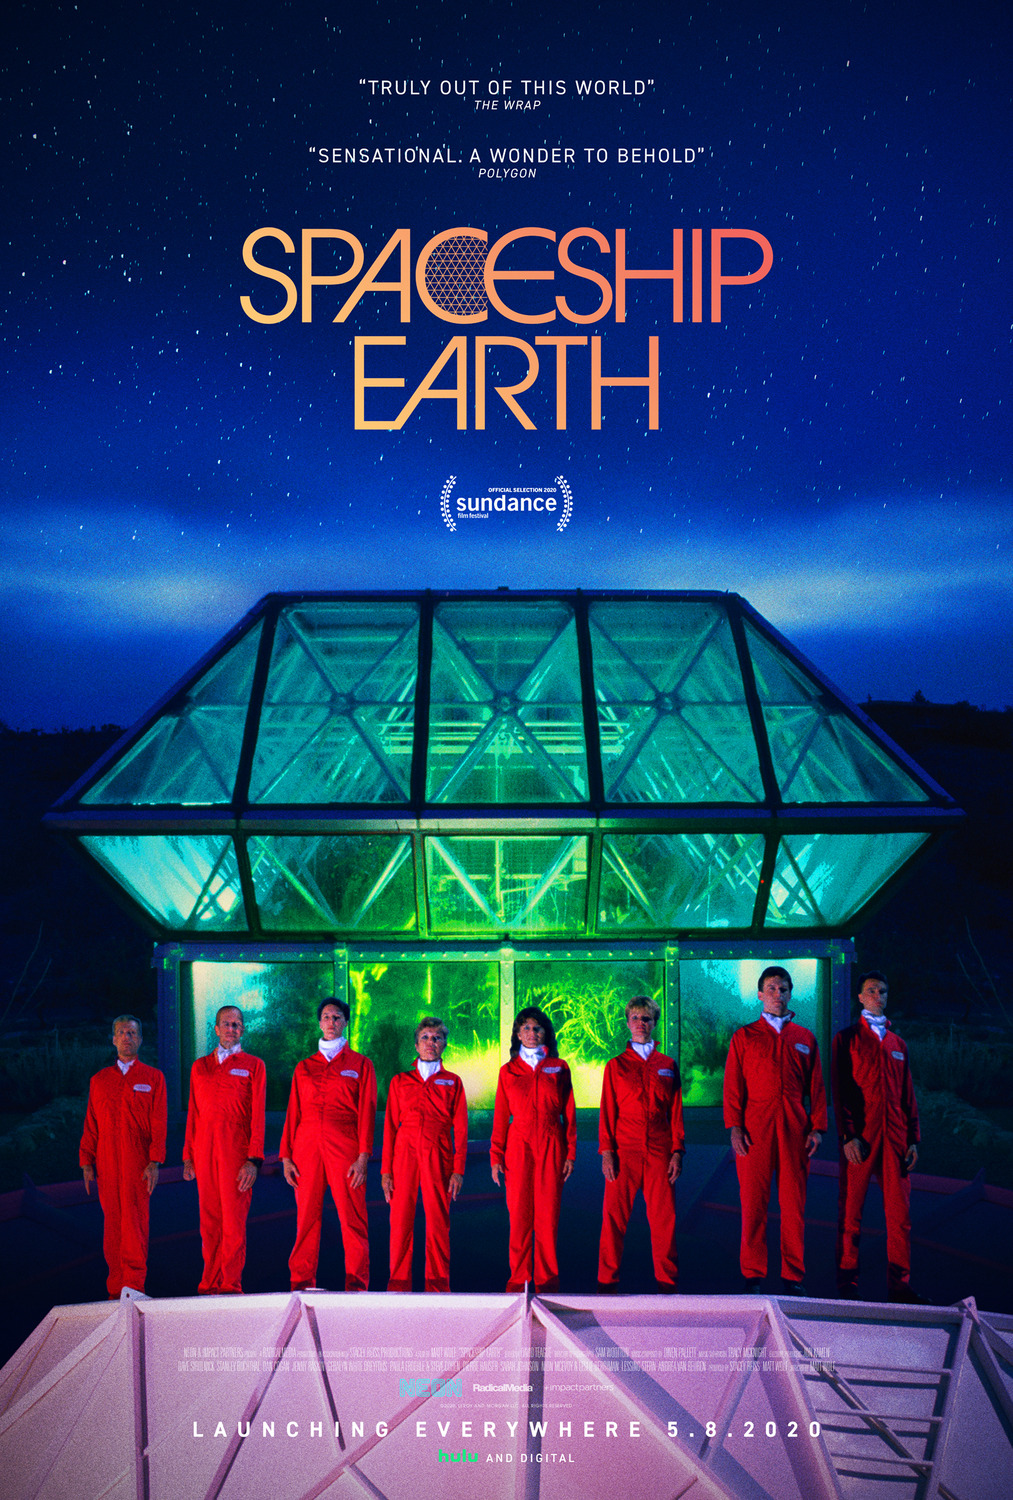 Extra Large Movie Poster Image for Spaceship Earth 